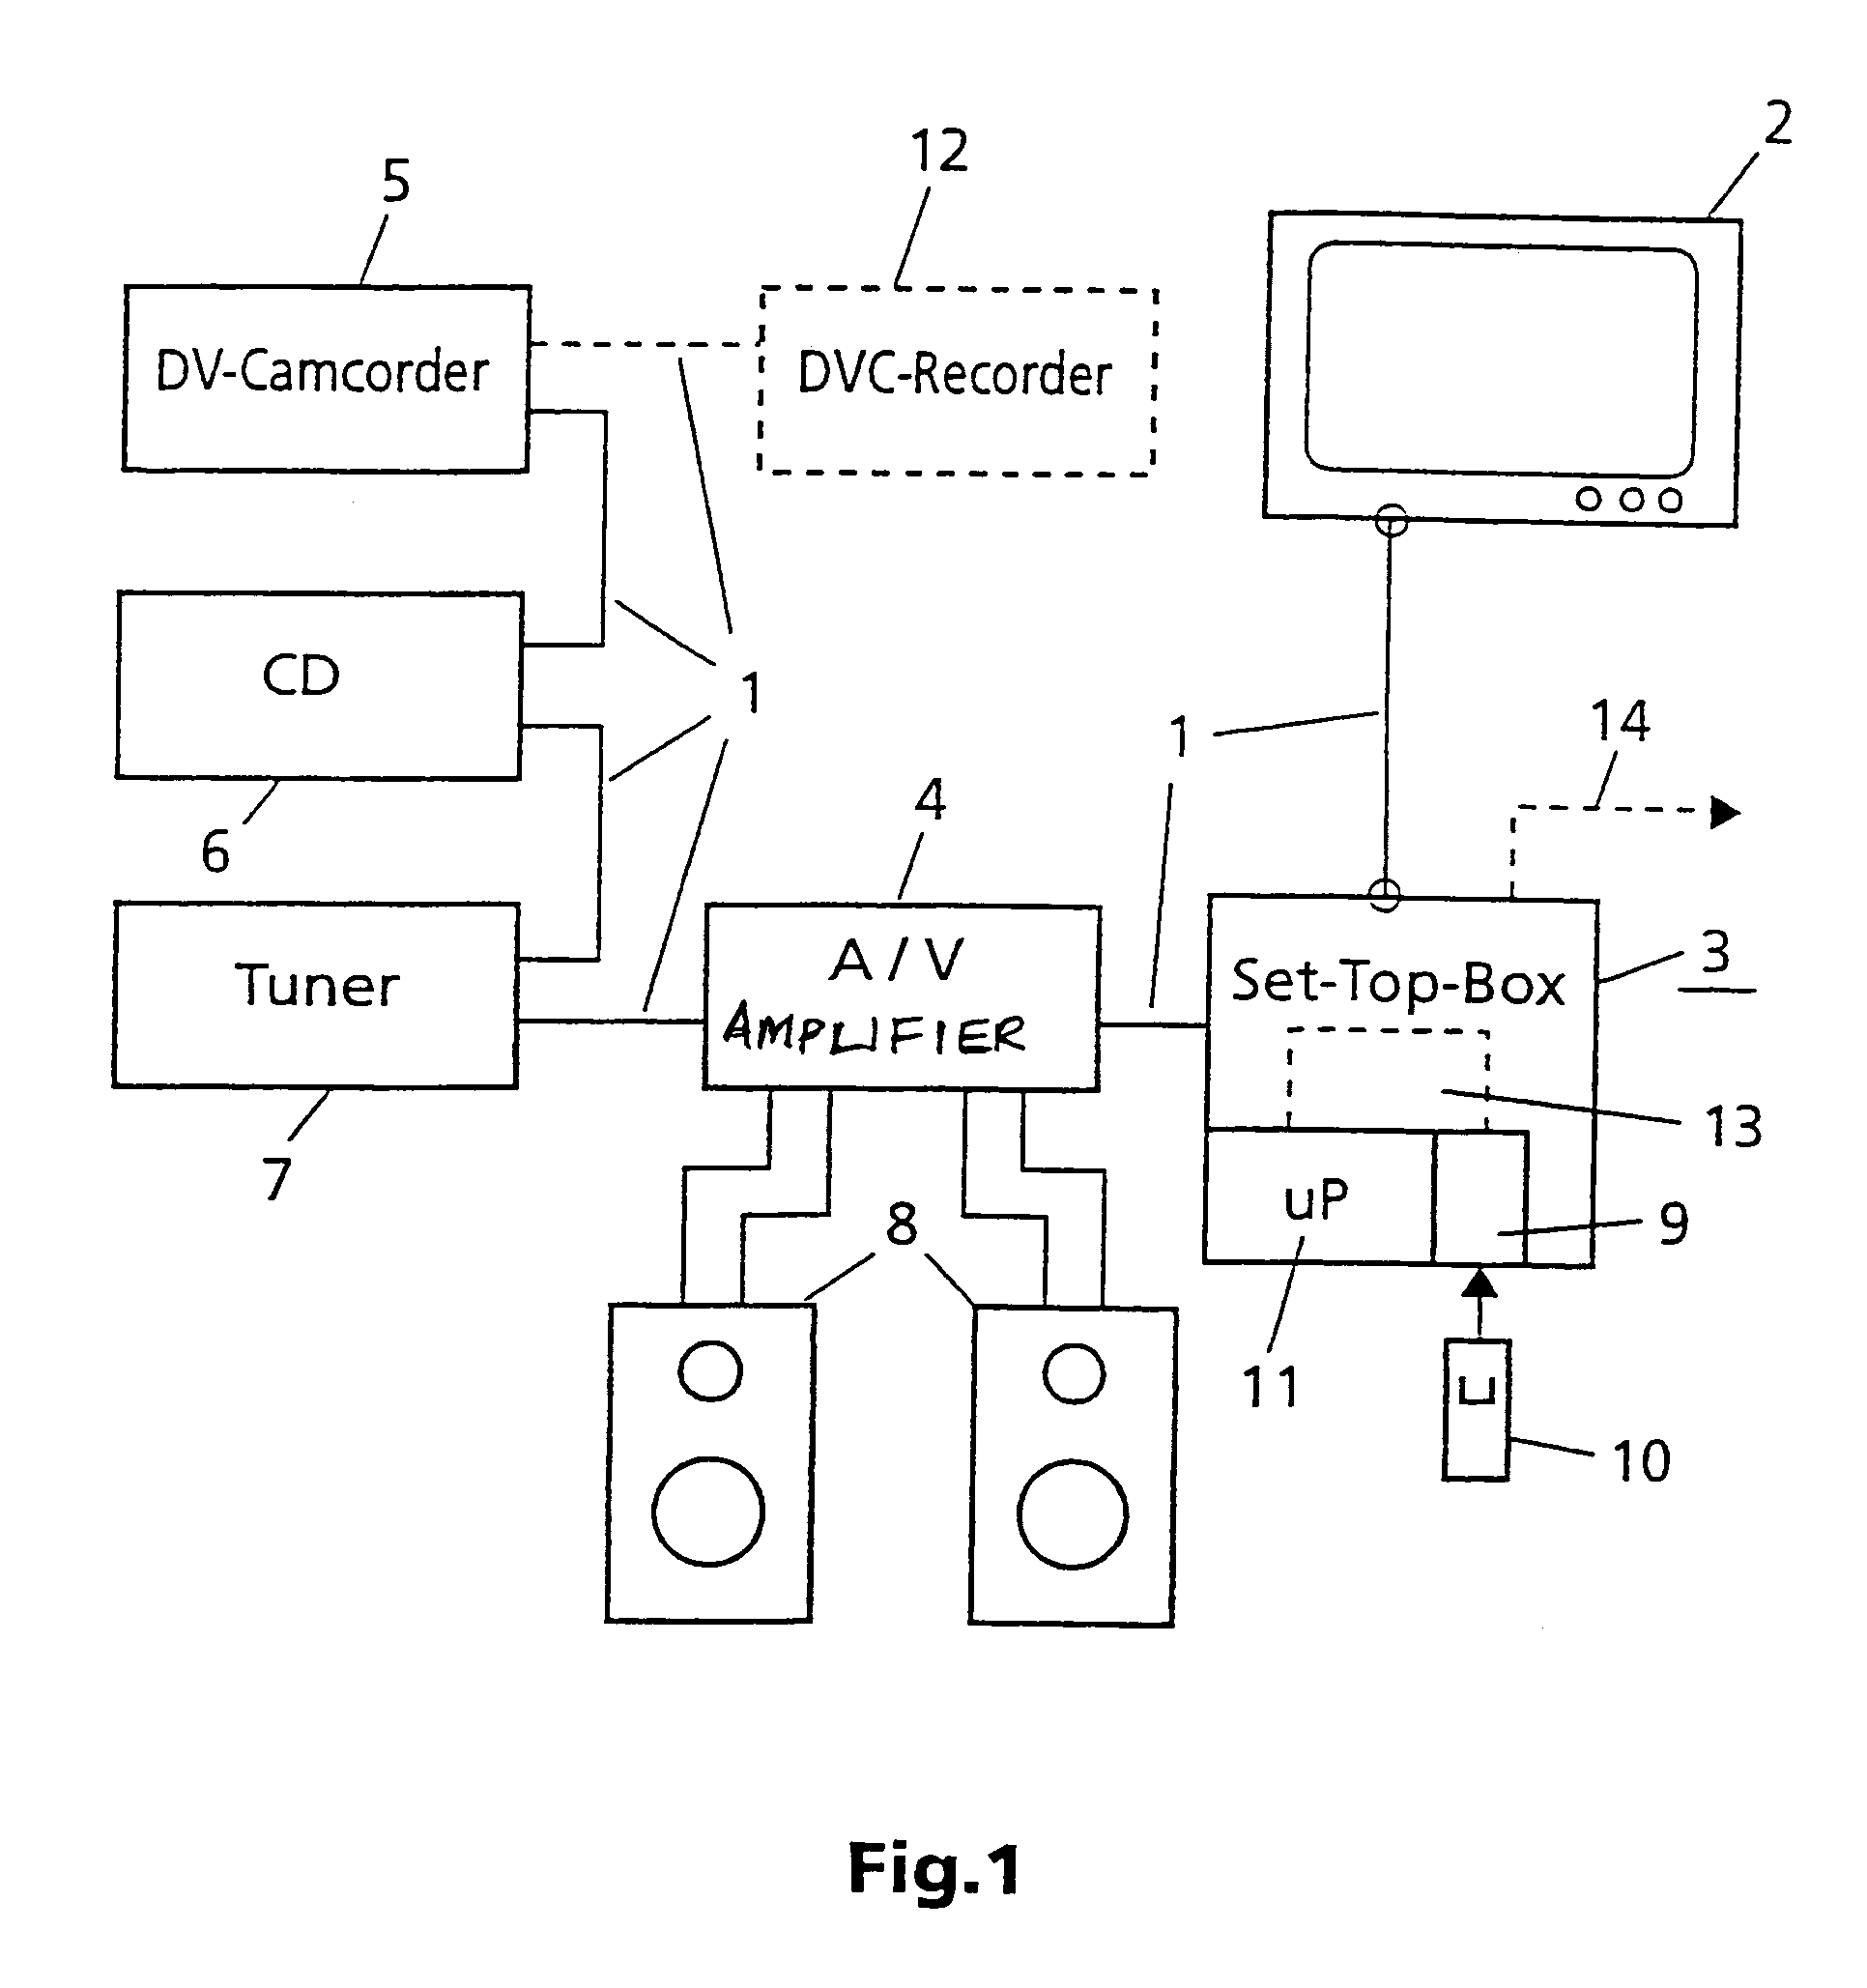 System for storing and transmitting home network system data